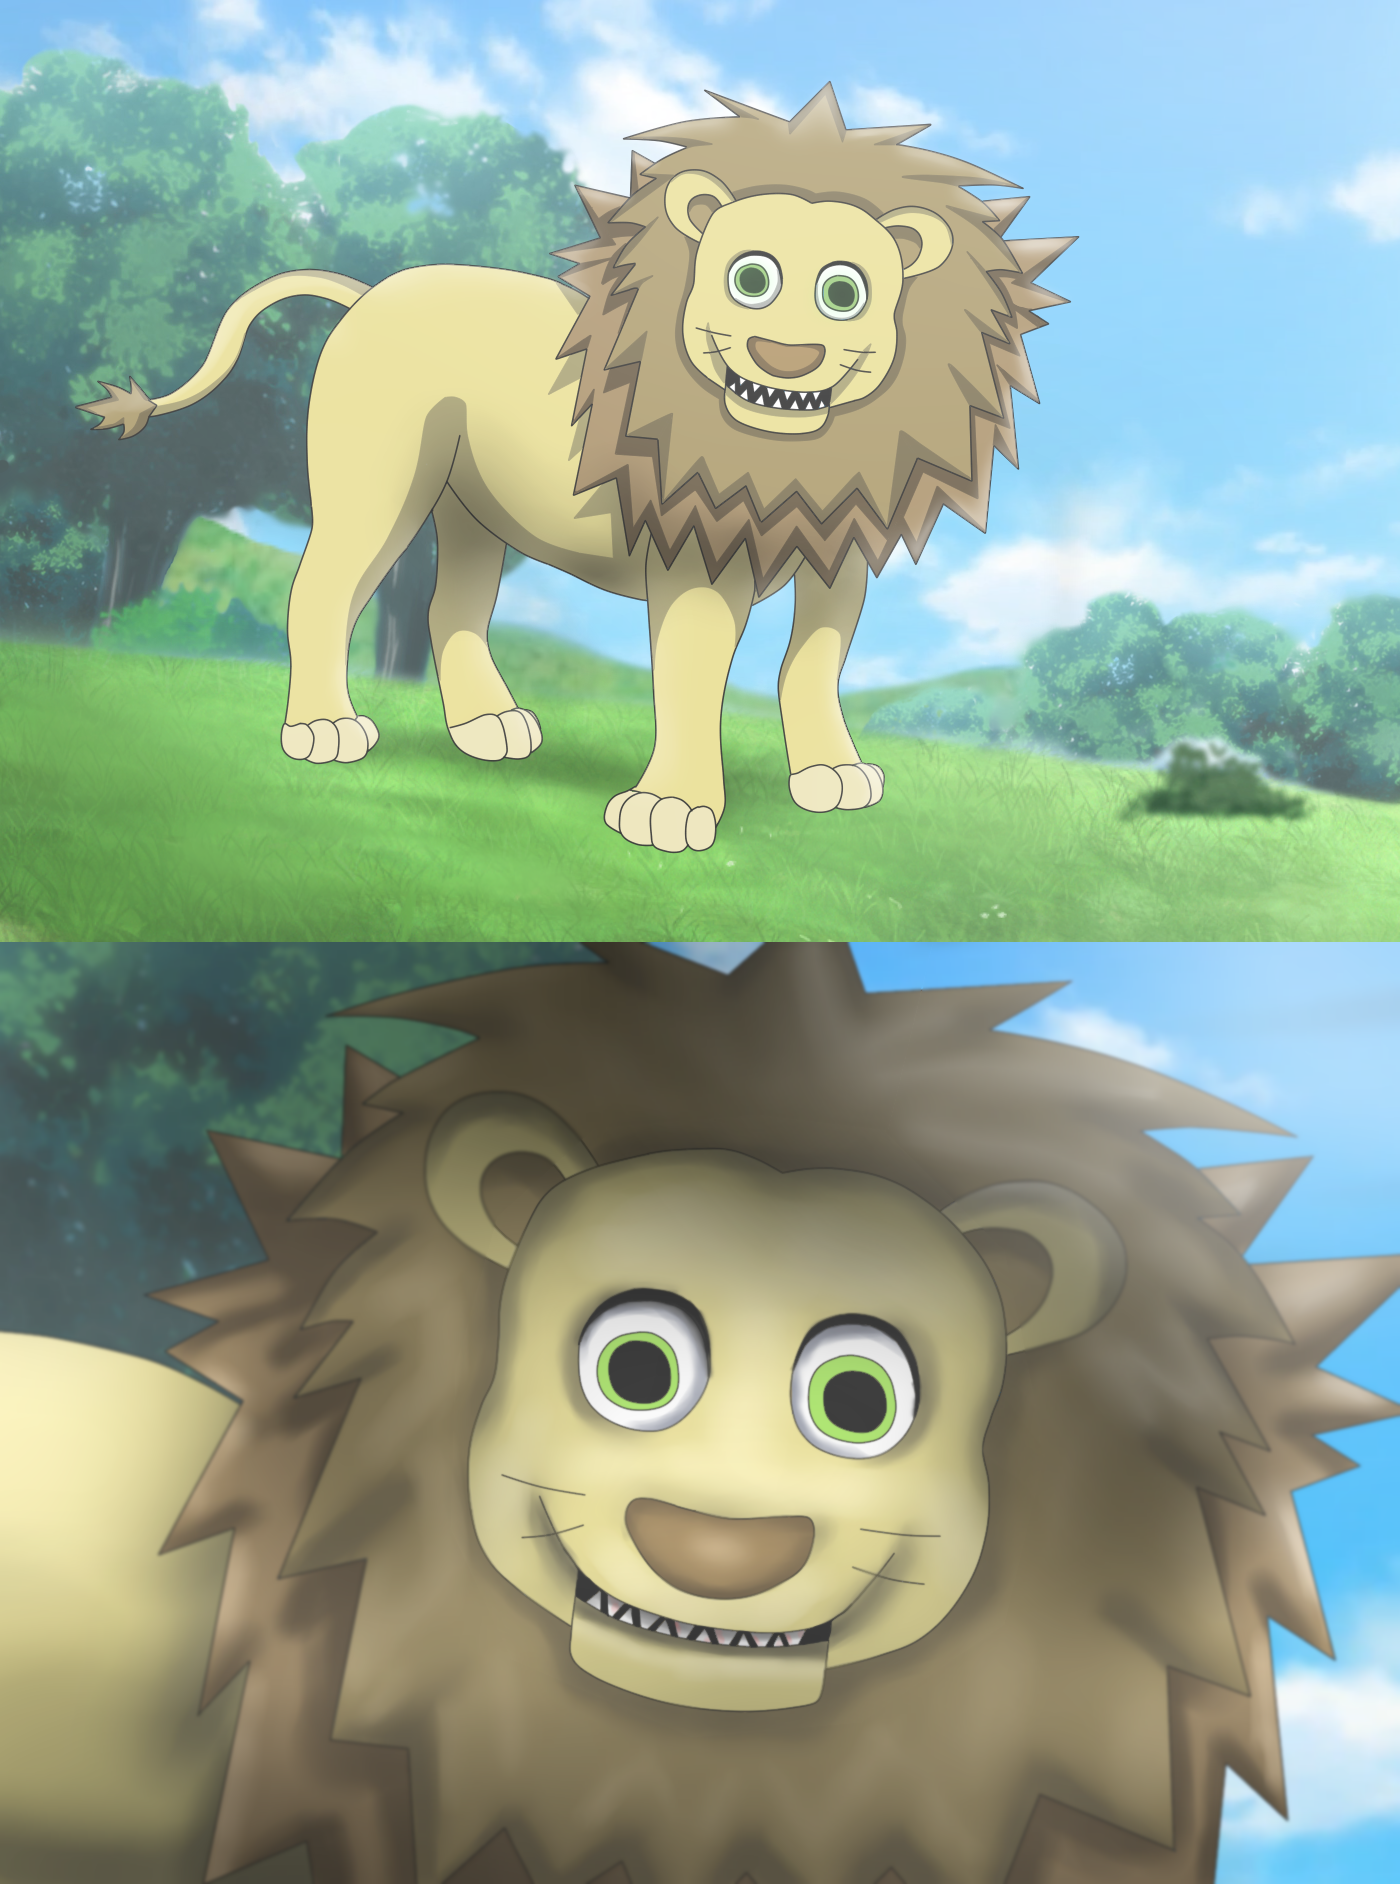 The Scary Lion by Xamp6 on DeviantArt